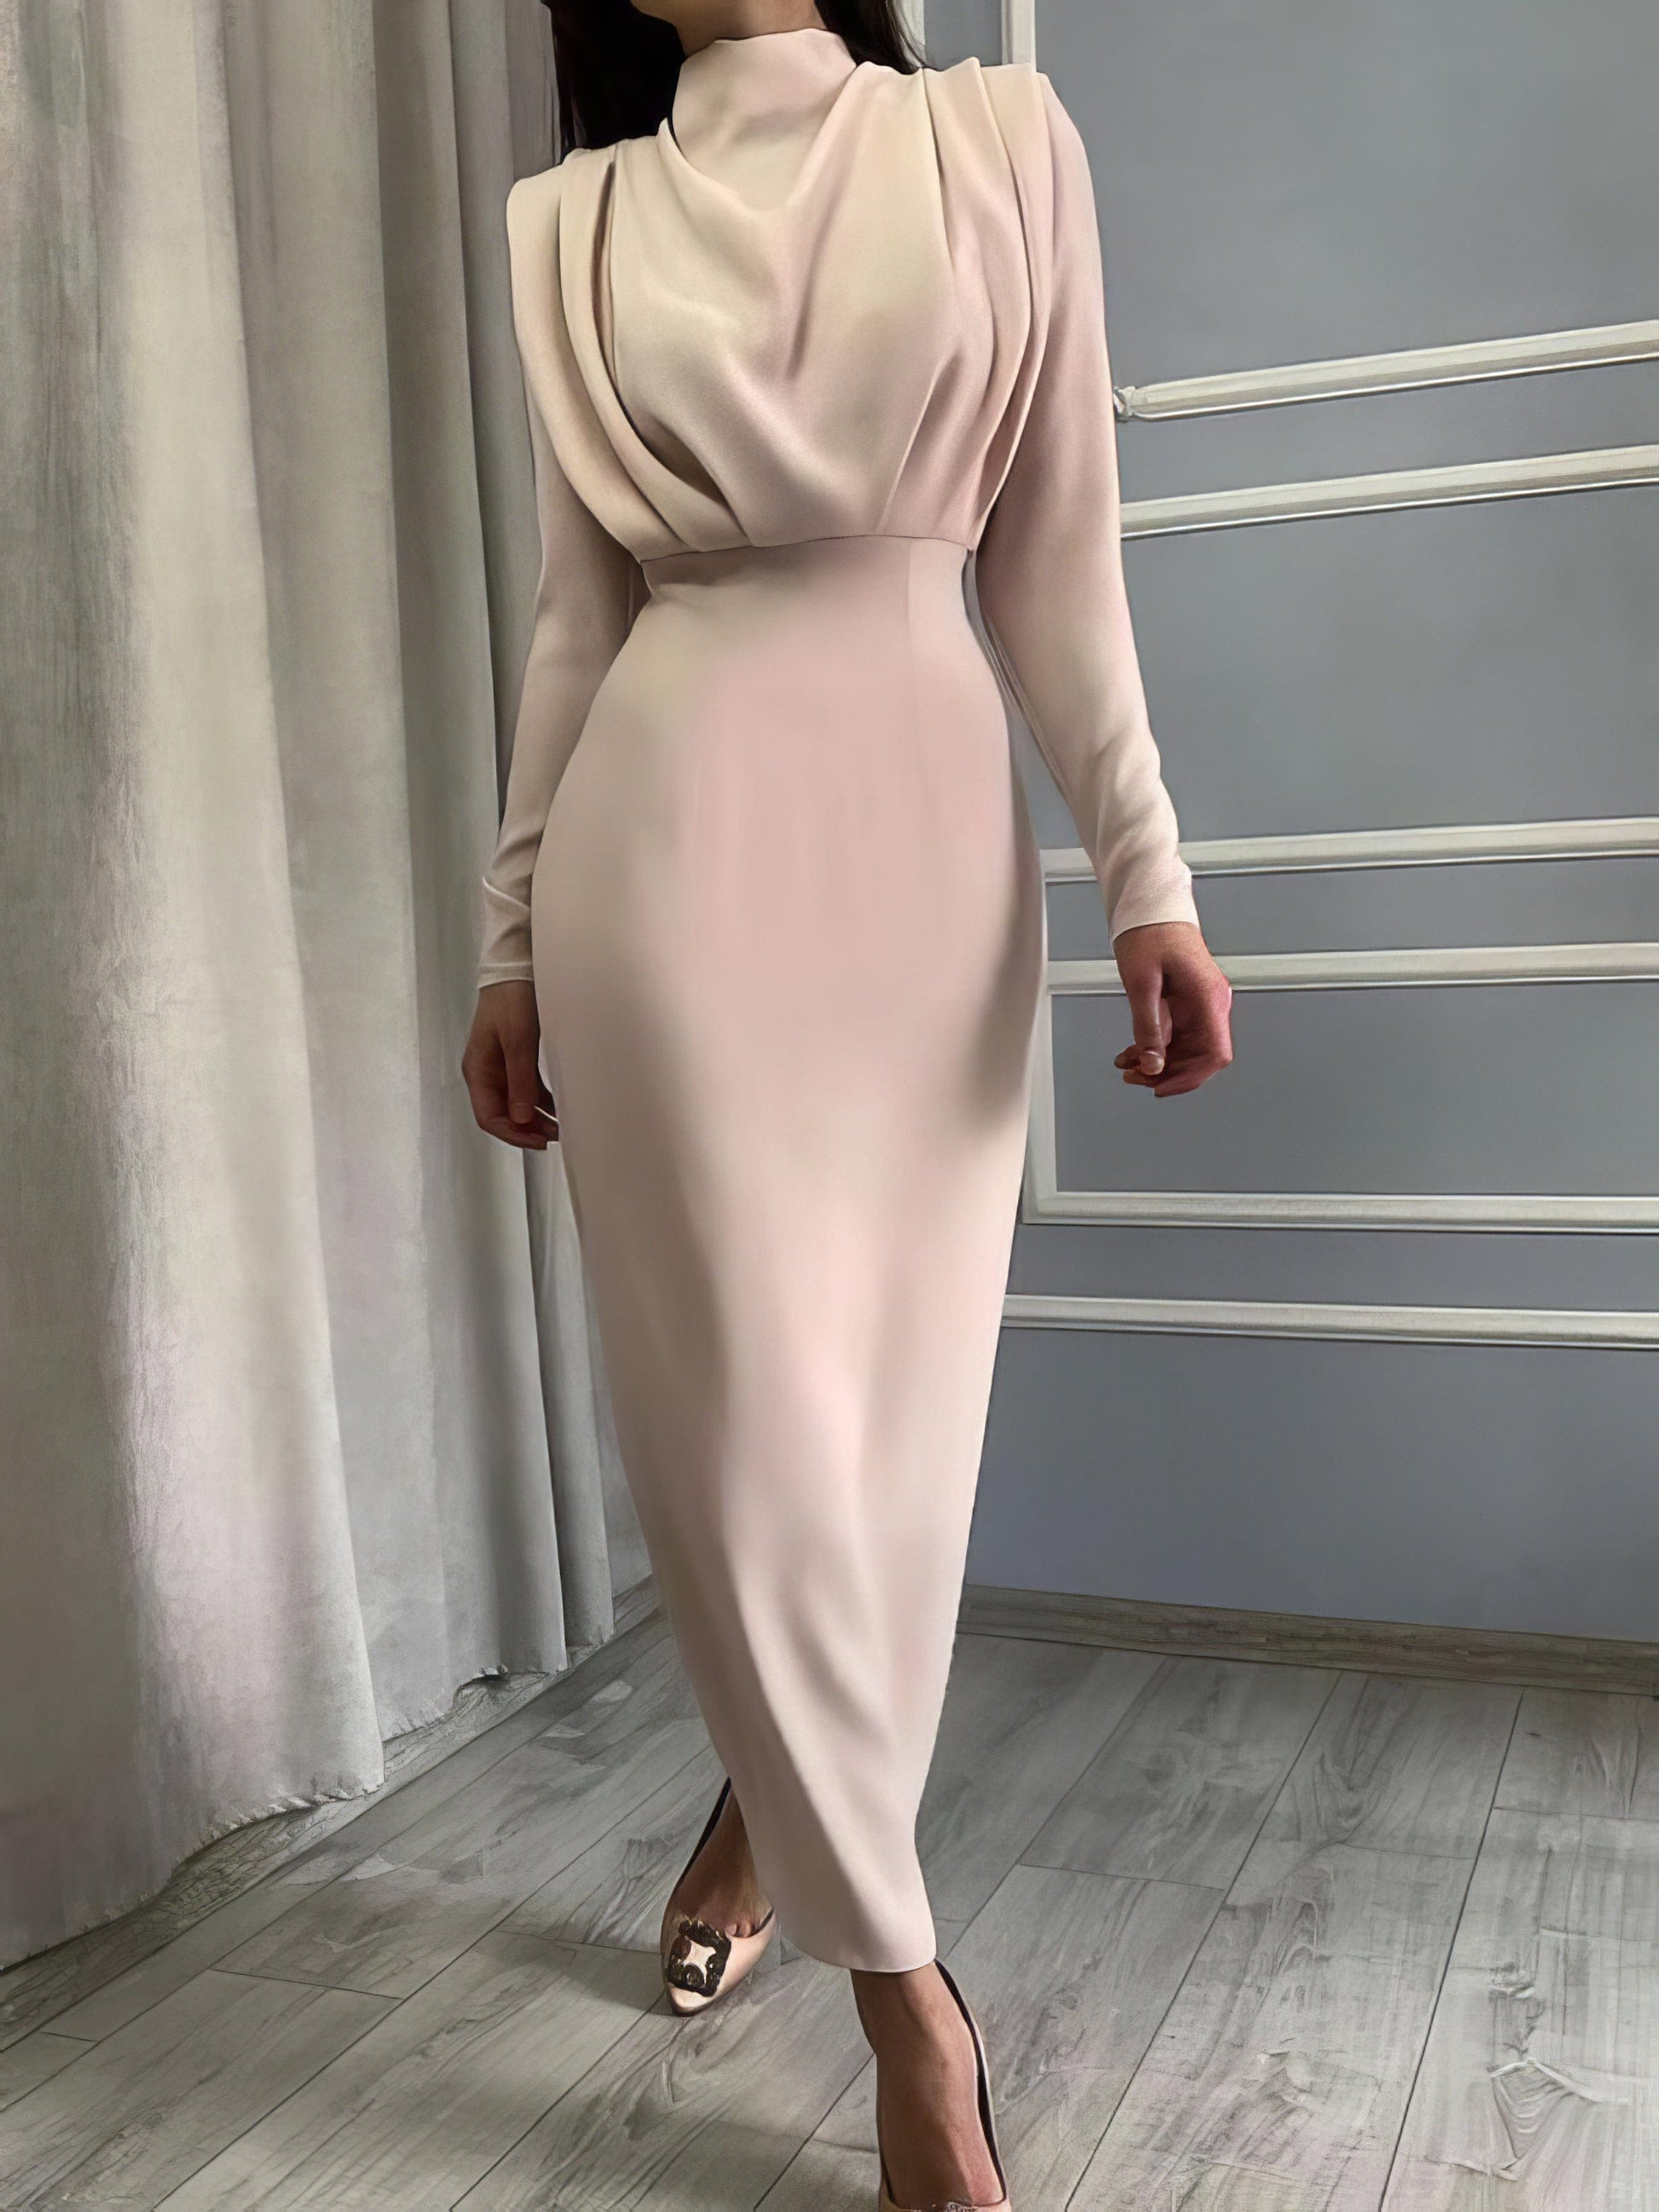 MsDressly Maxi Dresses Temperament Solid High Collar Pleated Long Sleeve Dress DRE2110132734APRS